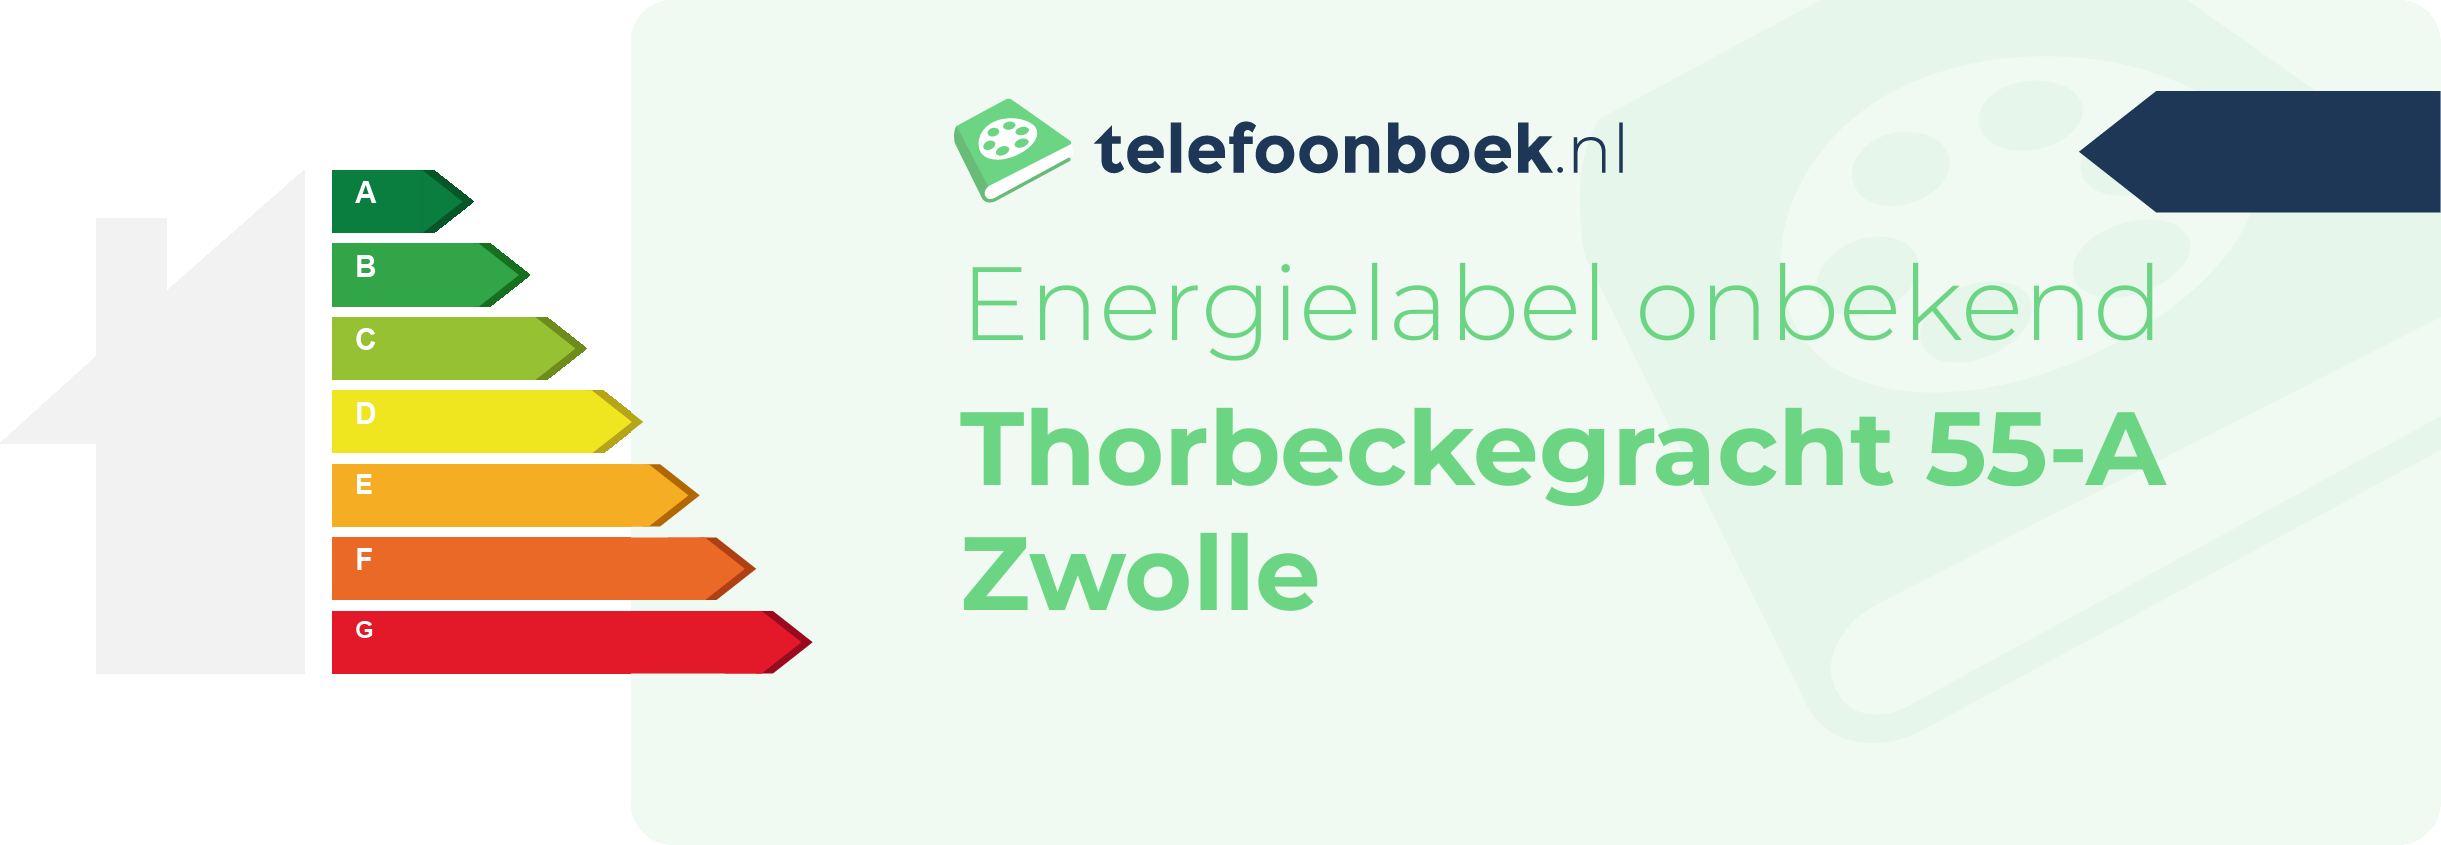 Energielabel Thorbeckegracht 55-A Zwolle